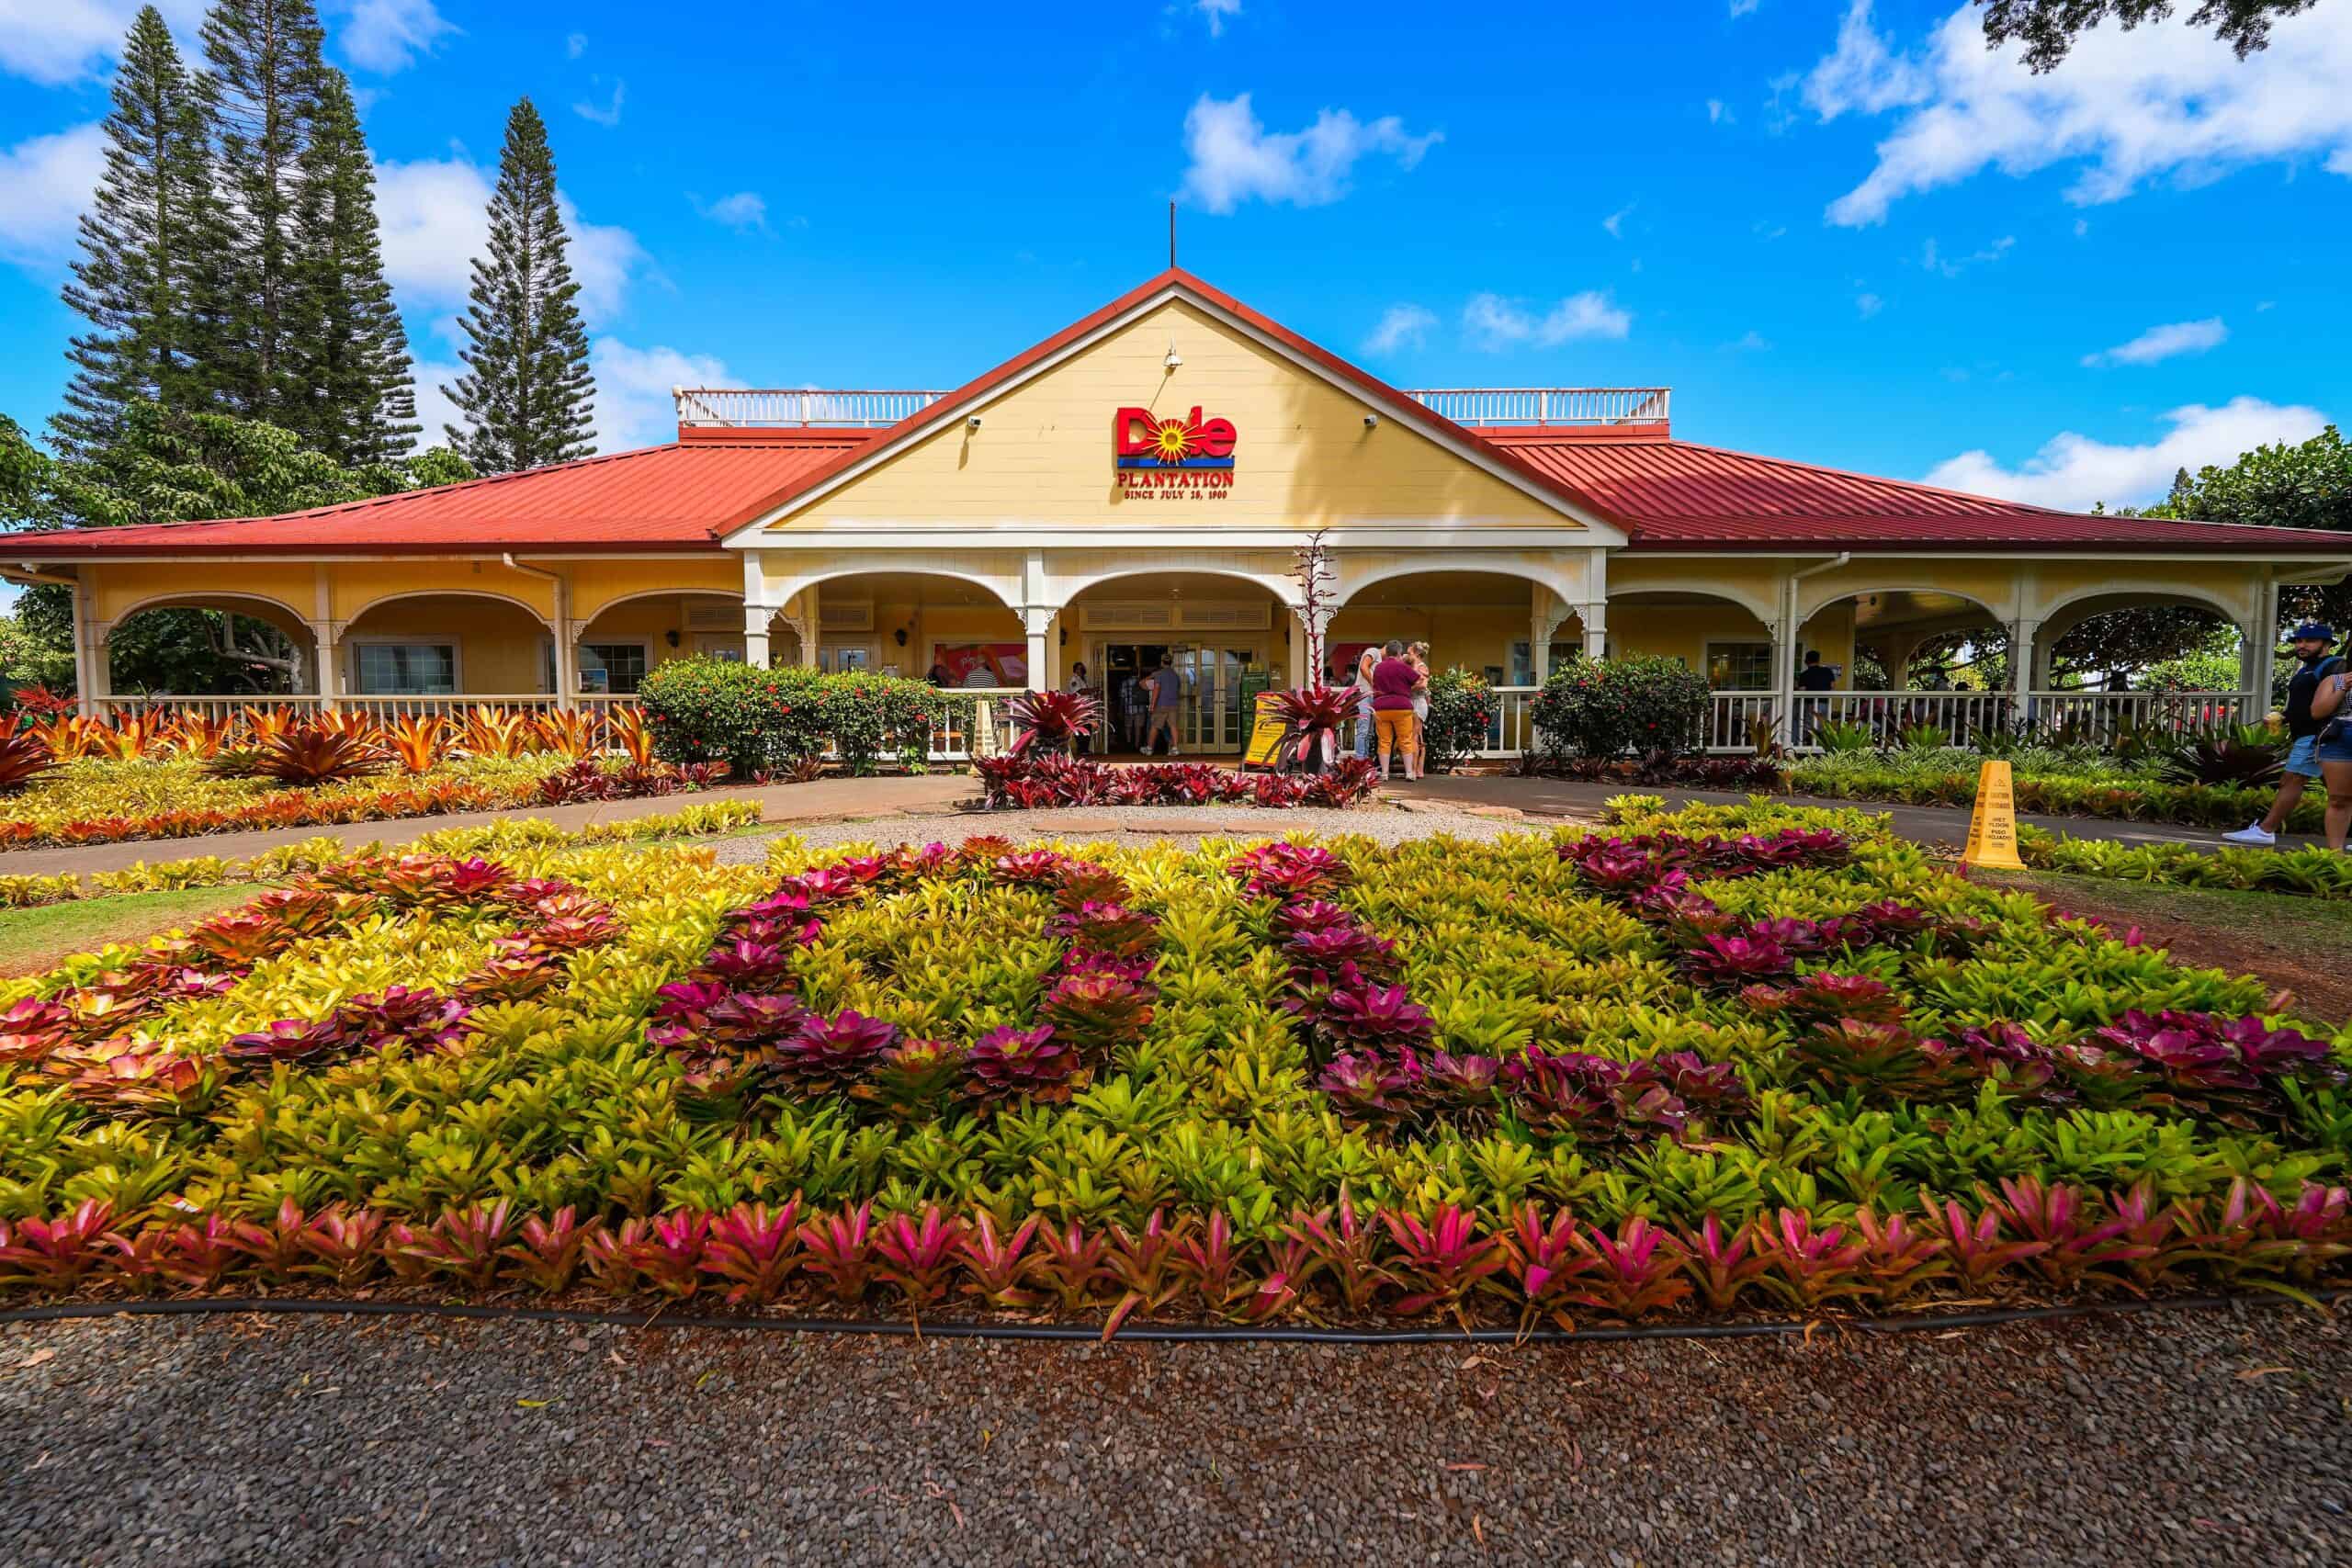 <ul> <li><strong>Location:</strong> Wahiawa, Hawaii</li> </ul> <p>Dole Plantation is one of Oahu's most popular tourist attractions. It celebrates all things pineapple, but in a way that many visitors find a bit expensive and over-the-top.</p> <p>Dole Plantation began as a fruit stand in 1950. Today, it is the self-proclaimed "Pineapple Experience" in Hawaii. Visitors can ride the narrated Pineapple Express Train, tour the Pineapple Garden, wander through the Pineapple Maze, and more.</p> <p>Dole Plantation is often crowded and many guests leave feeling underwhelmed. However, as with most tourist traps, there are some redeeming features. Specifically, the Dole Whip is a delicious treat. Get ready to fork over some cash for it, though. As of this writing, a regular-sized cup of Dole Whip costs $7.50.</p> <p>Agree with this? Hit the Thumbs Up button above. Disagree? Let us know in the comments with what you'd change.</p>